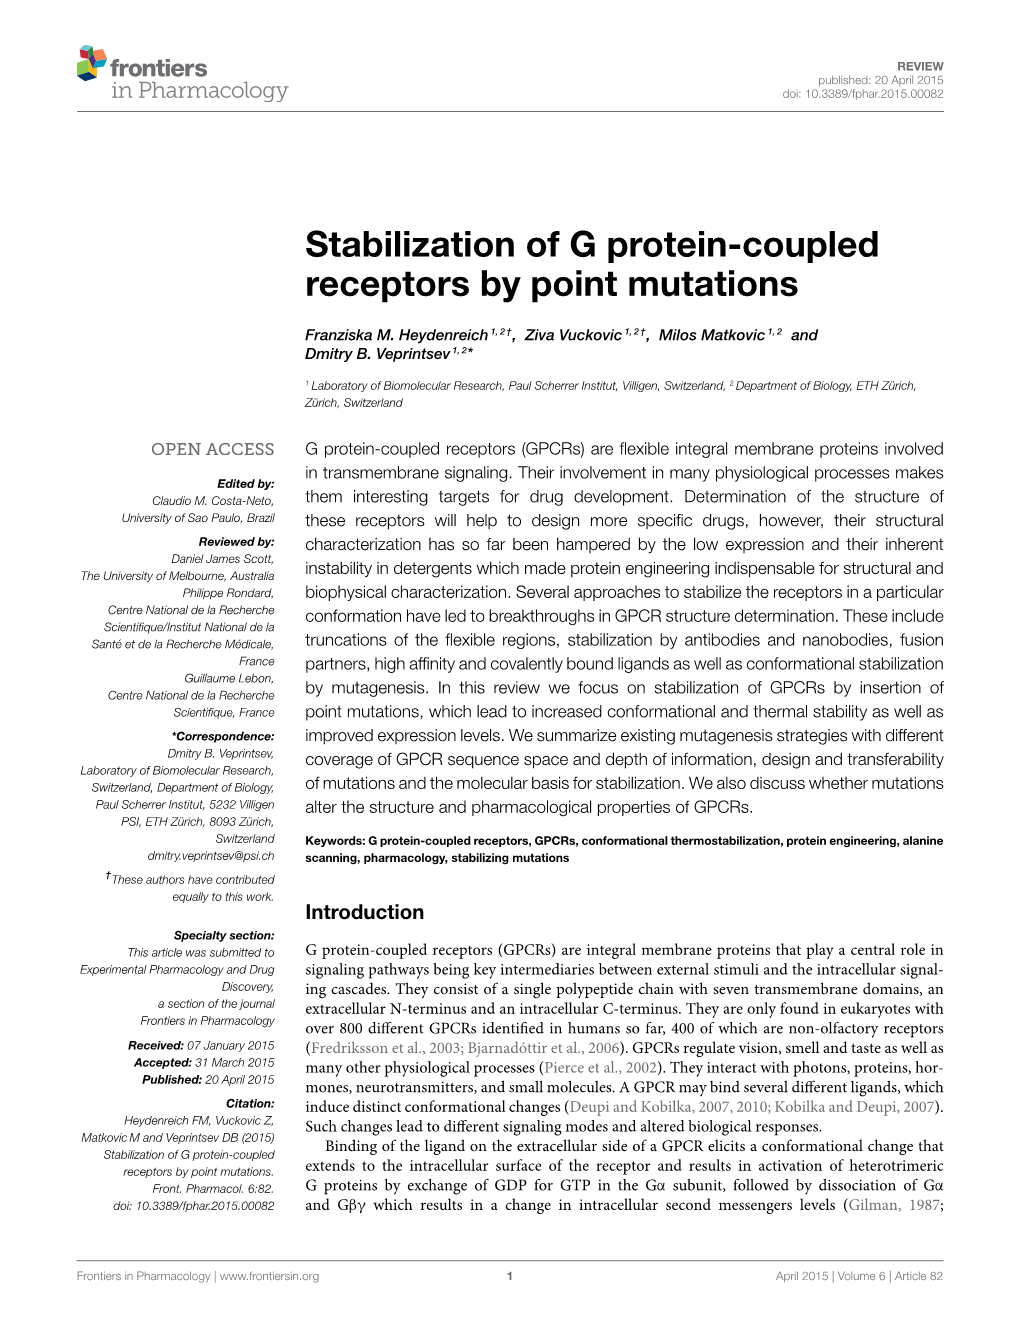 Stabilization of G Protein-Coupled Receptors by Point Mutations